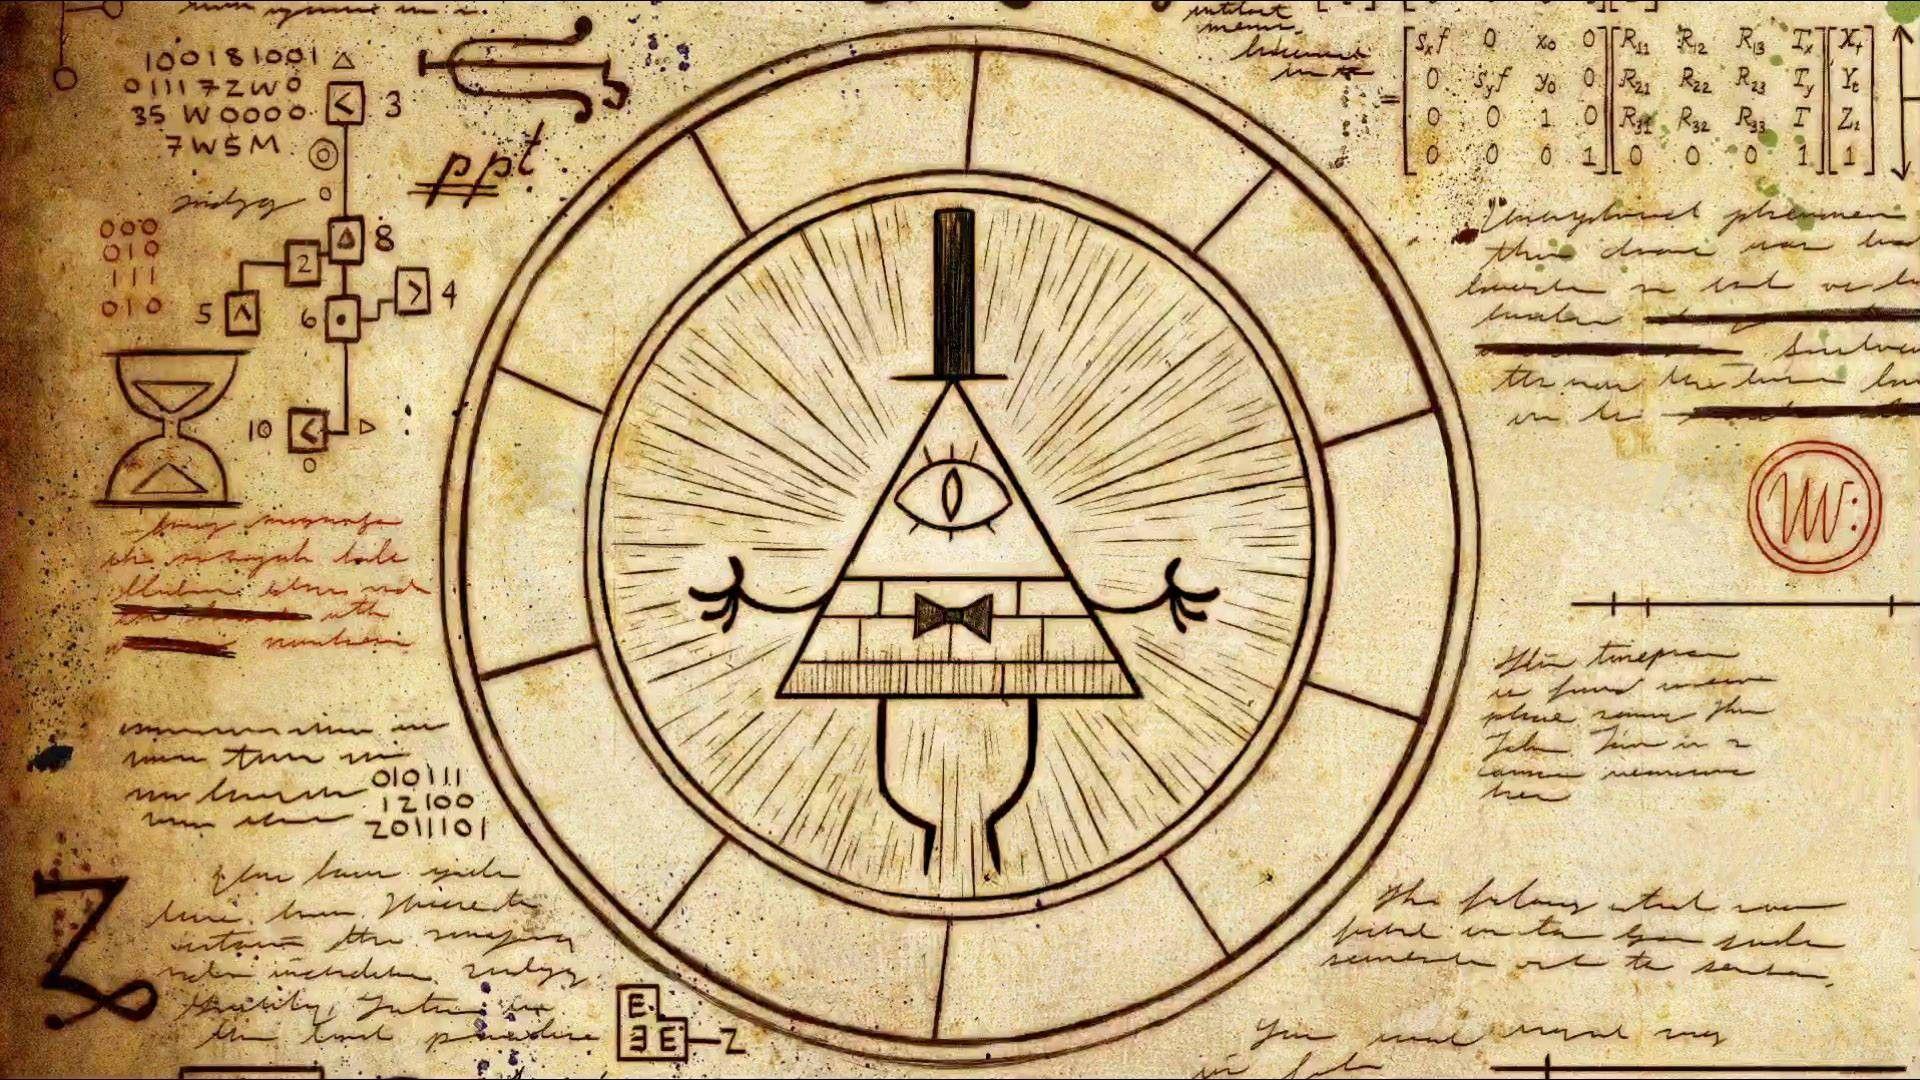 Wallpapers For > Illuminati Wallpapers Hd Iphone